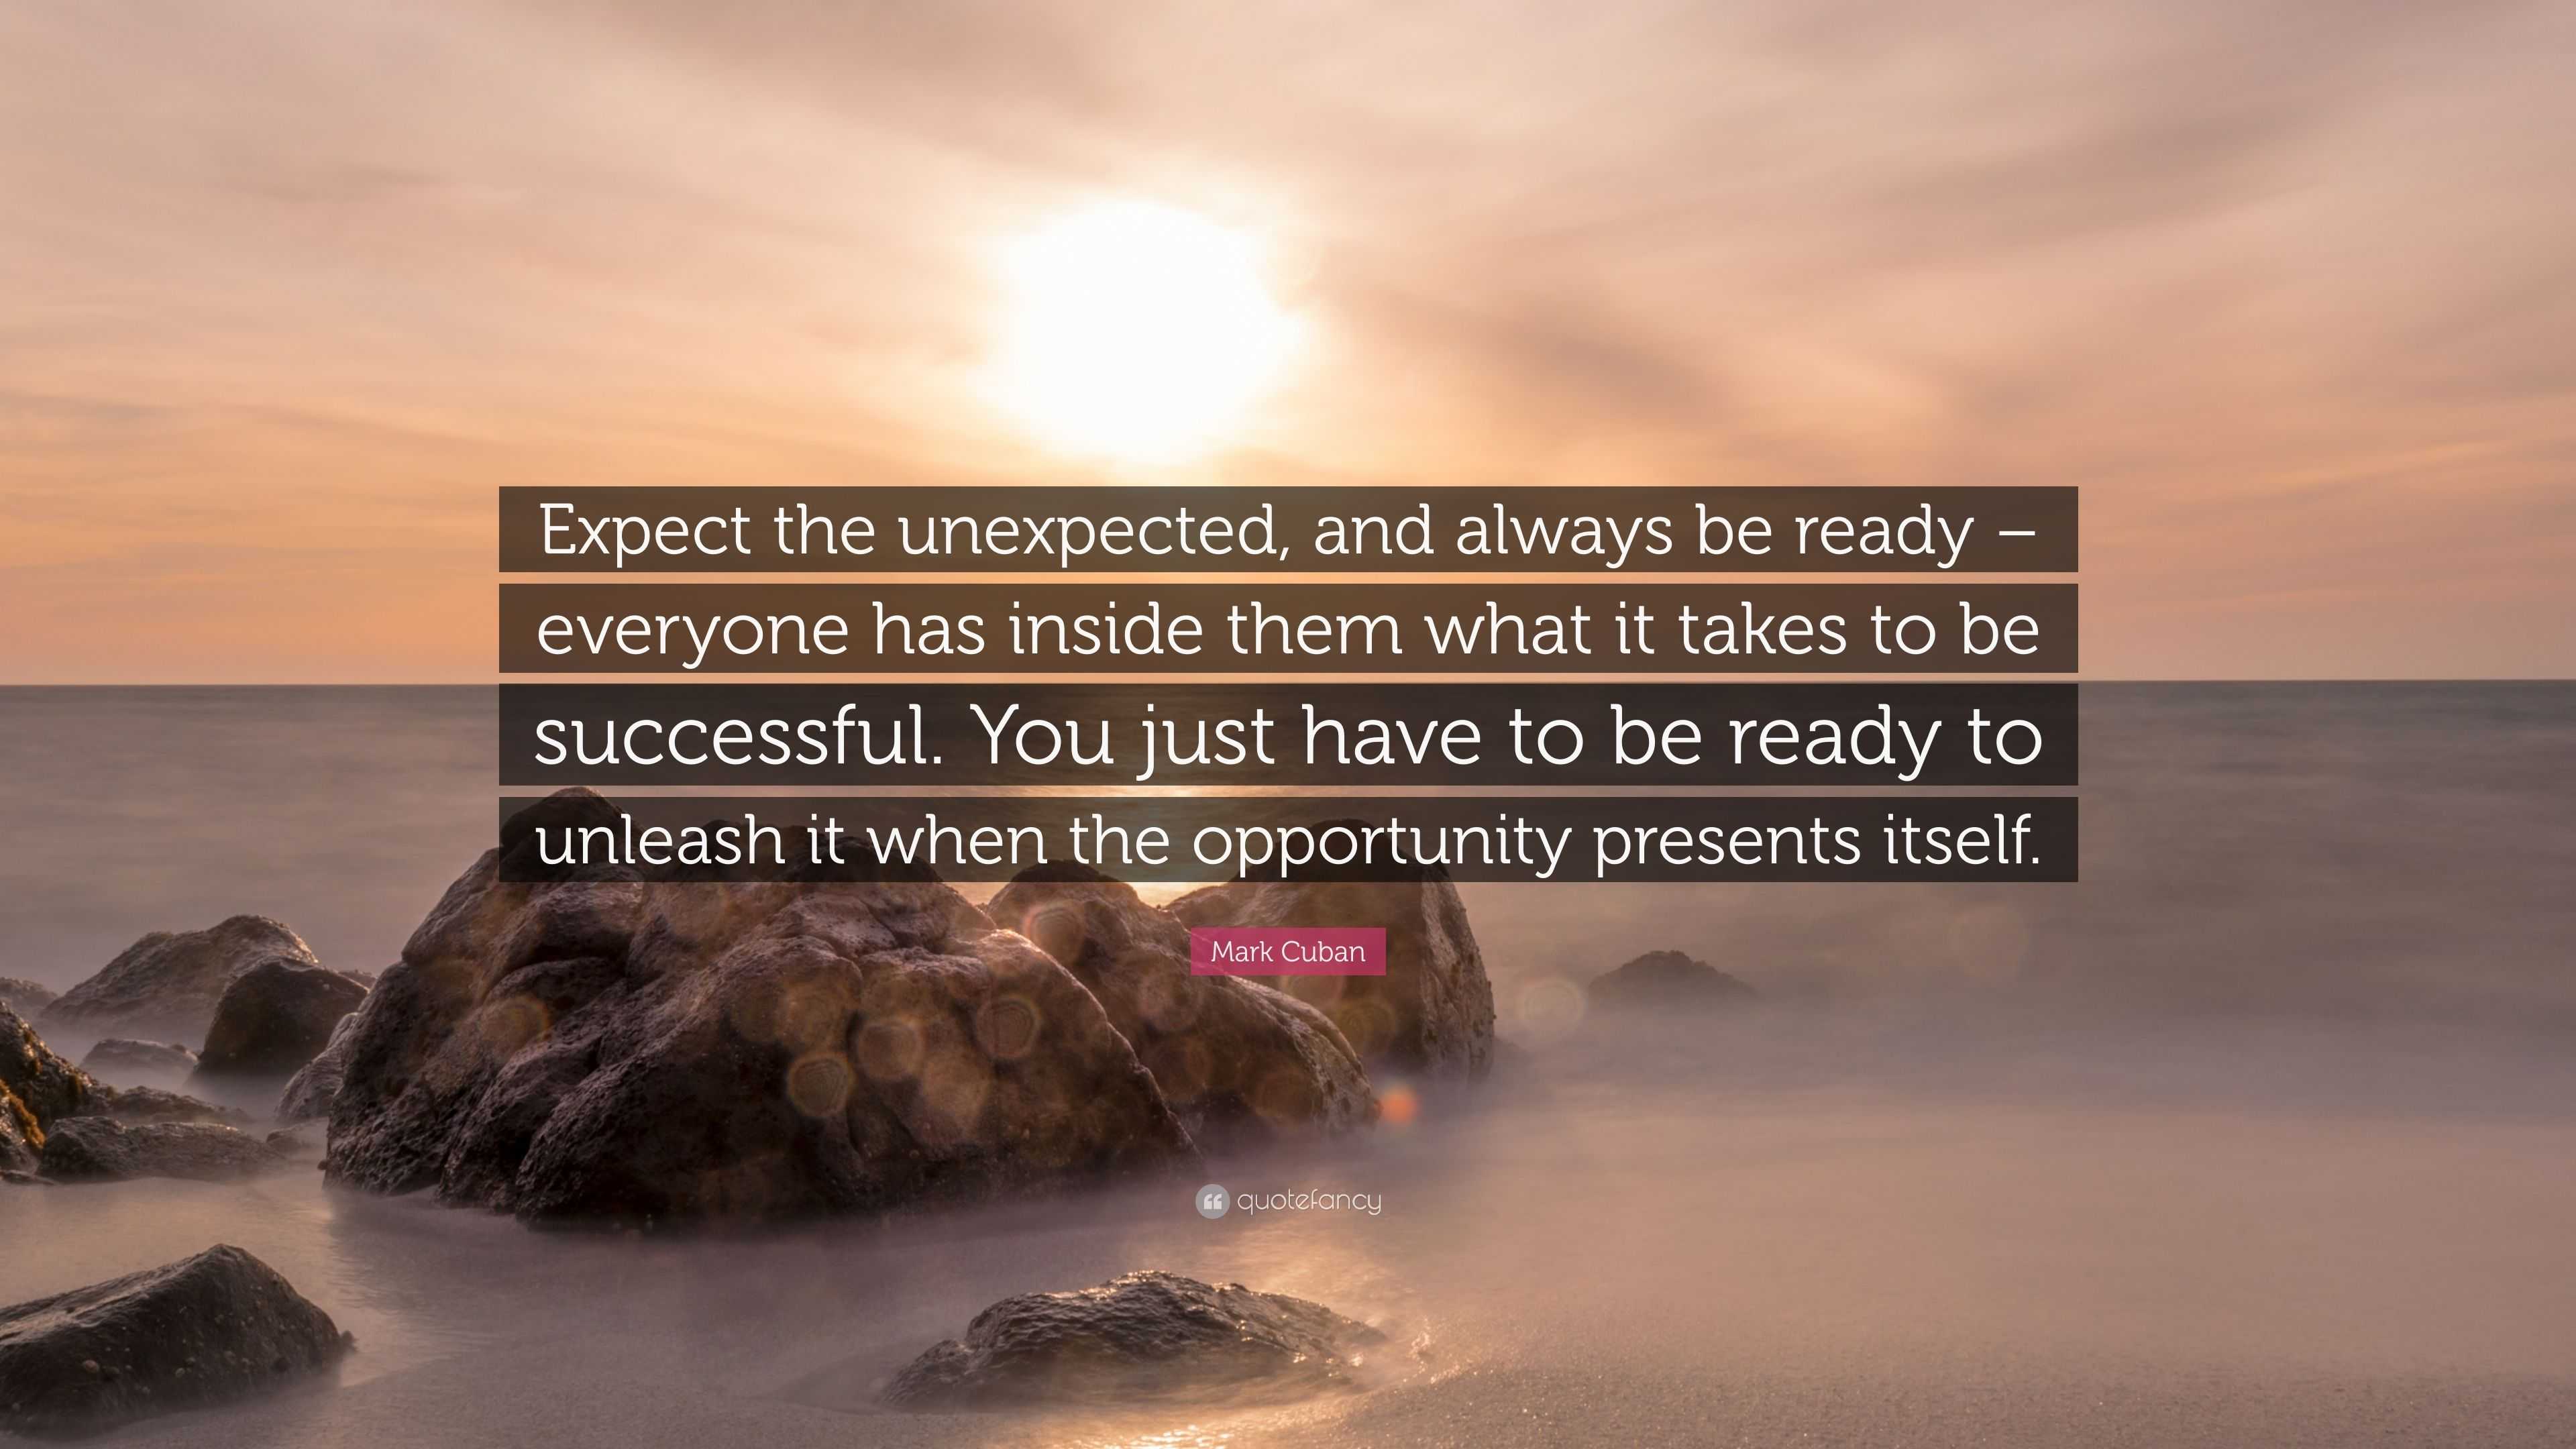 Mark Cuban Quote: “Expect the unexpected, and always be ready ...